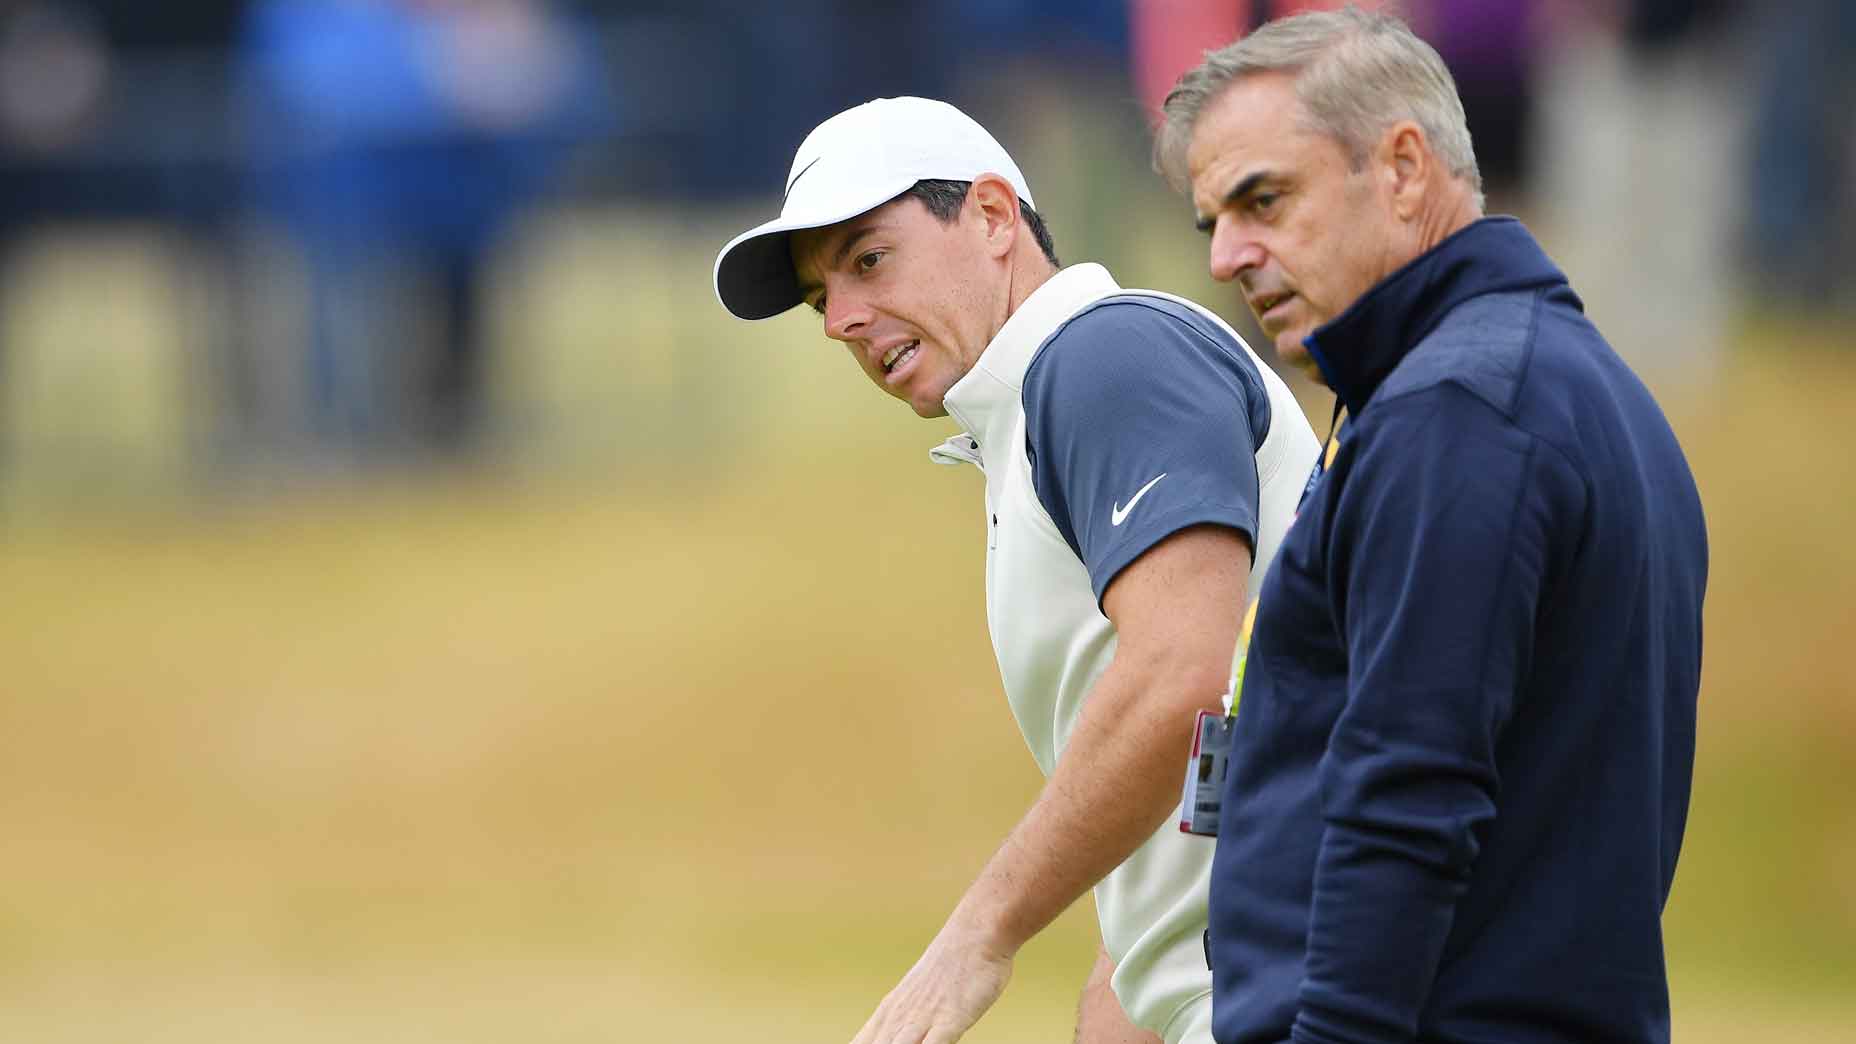 It's been 10 years since Rory McIlroy's won a major. His former Ryder Cup captain, Paul McGinley, offers up 2 potential reasons why